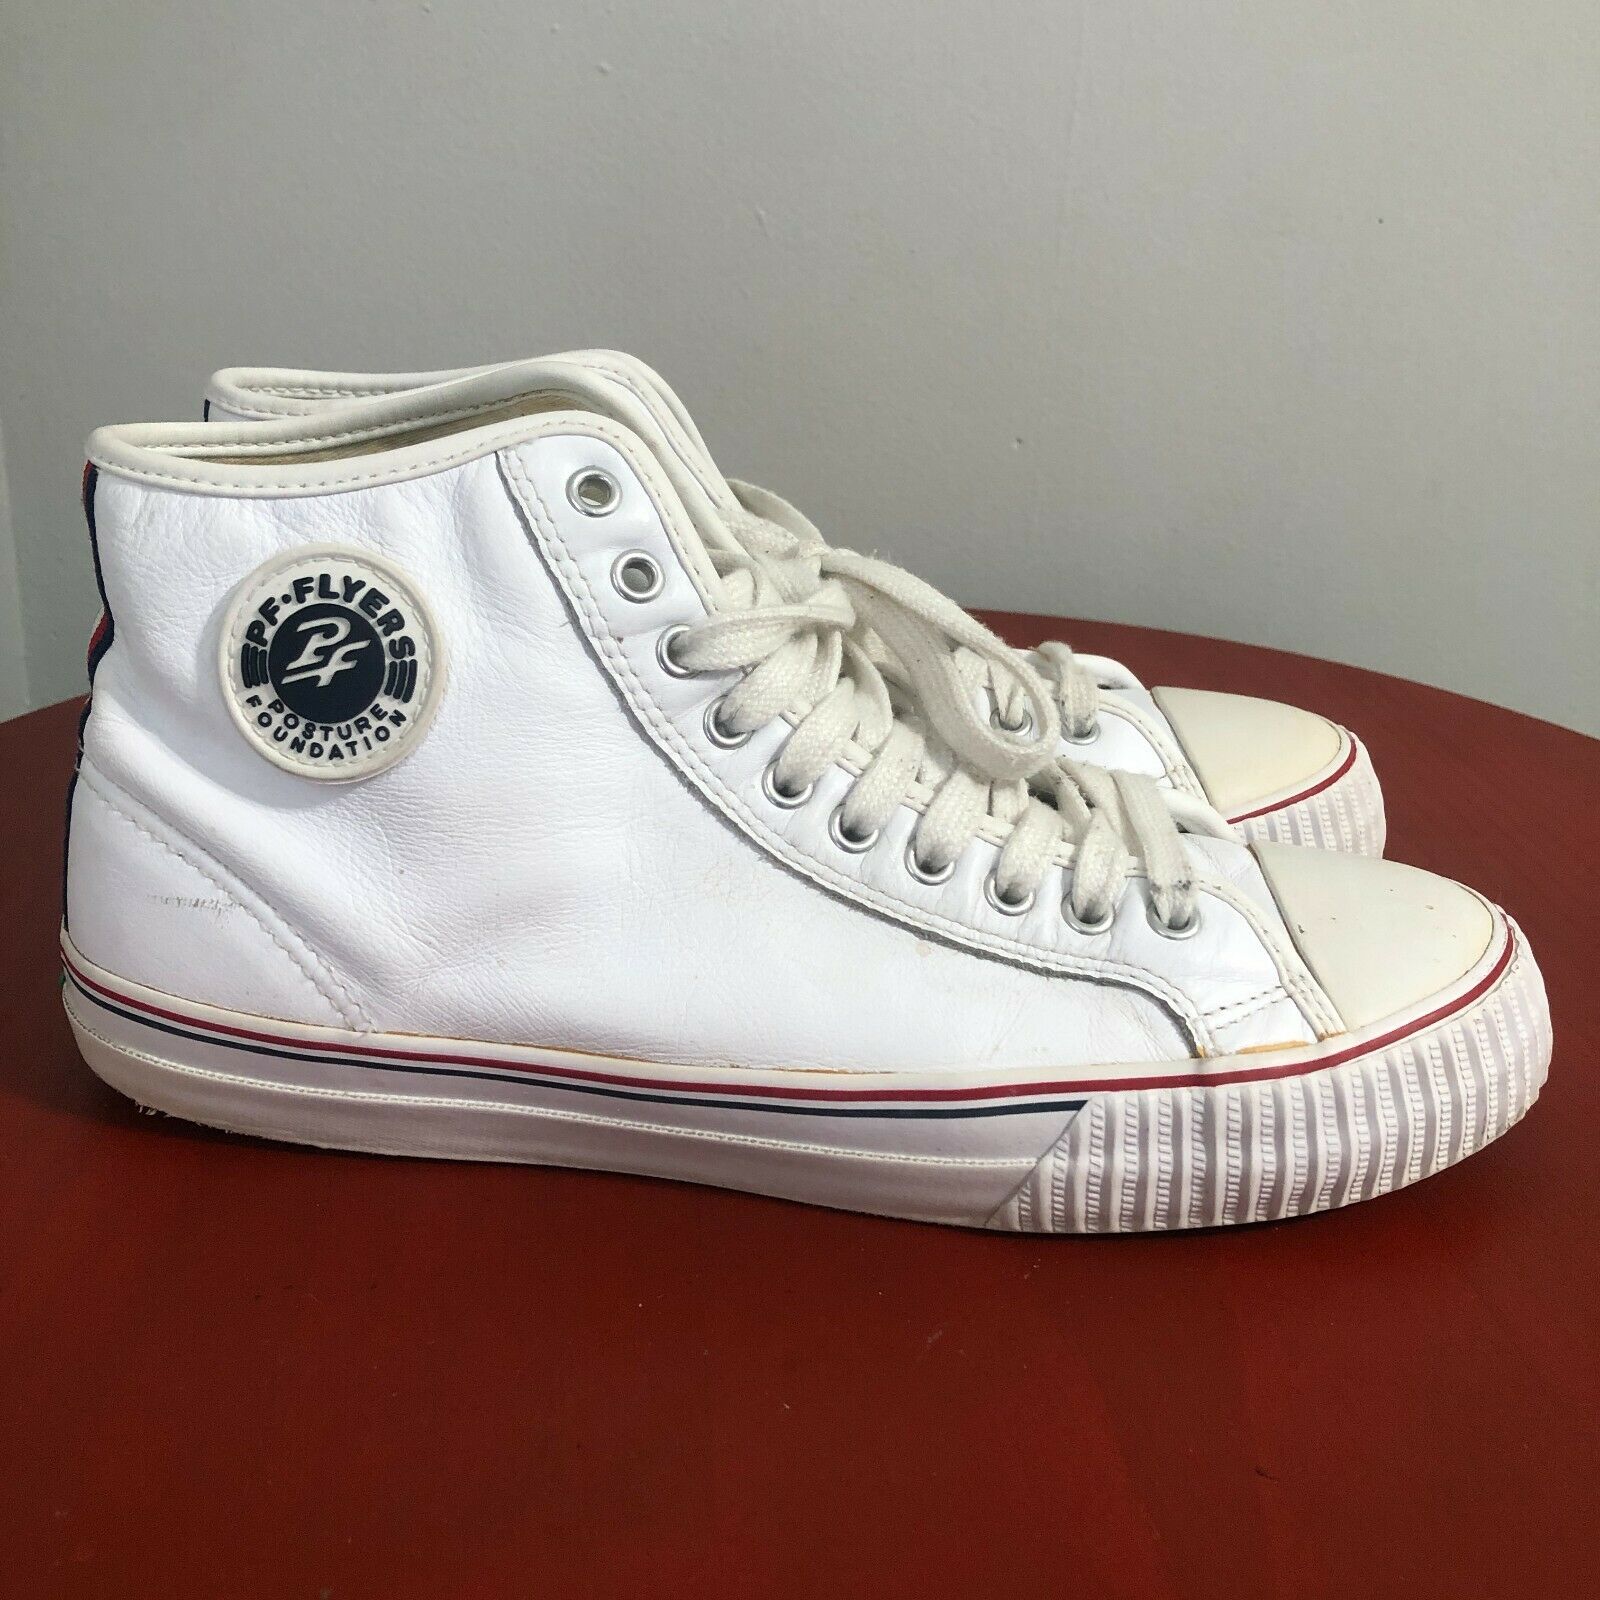 PF Flyers Center Men's Size 11 Shoes White Red Leather Lace Up High Top Sneakers